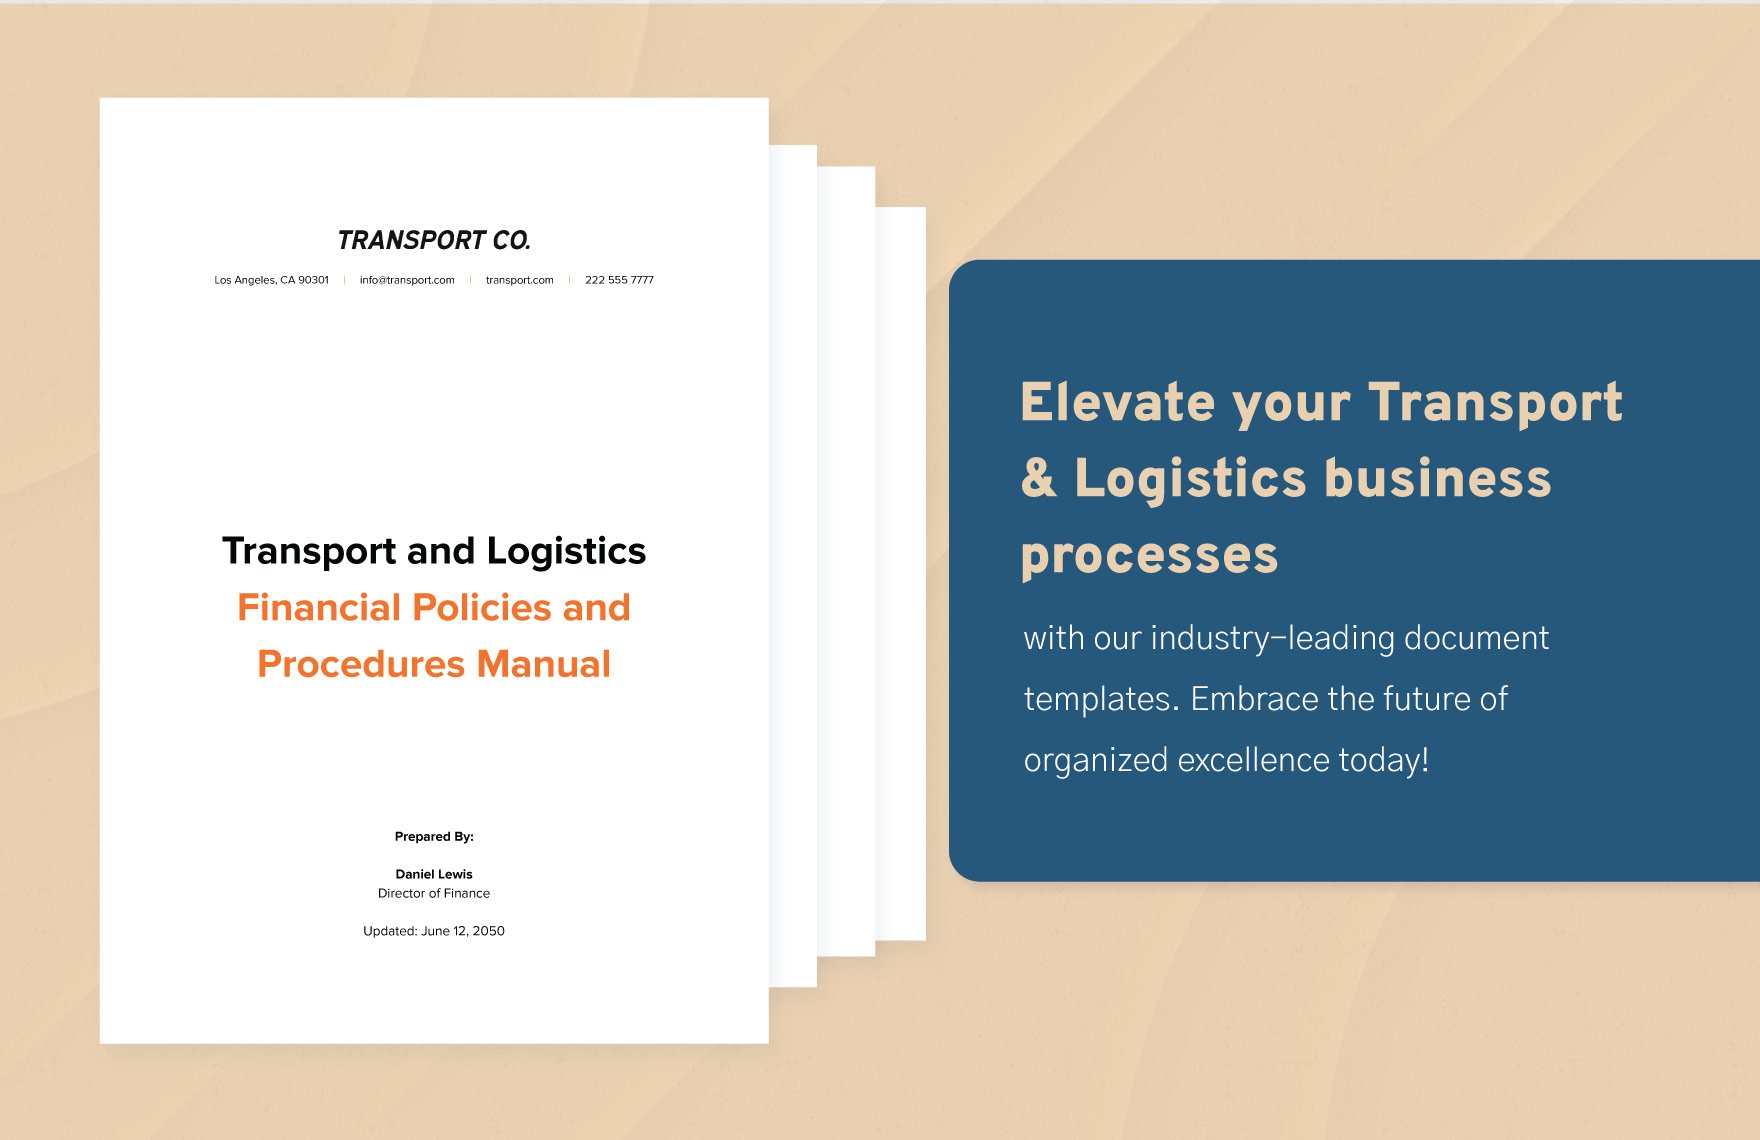 Transport and Logistics Financial Policies and Procedures Manual Template